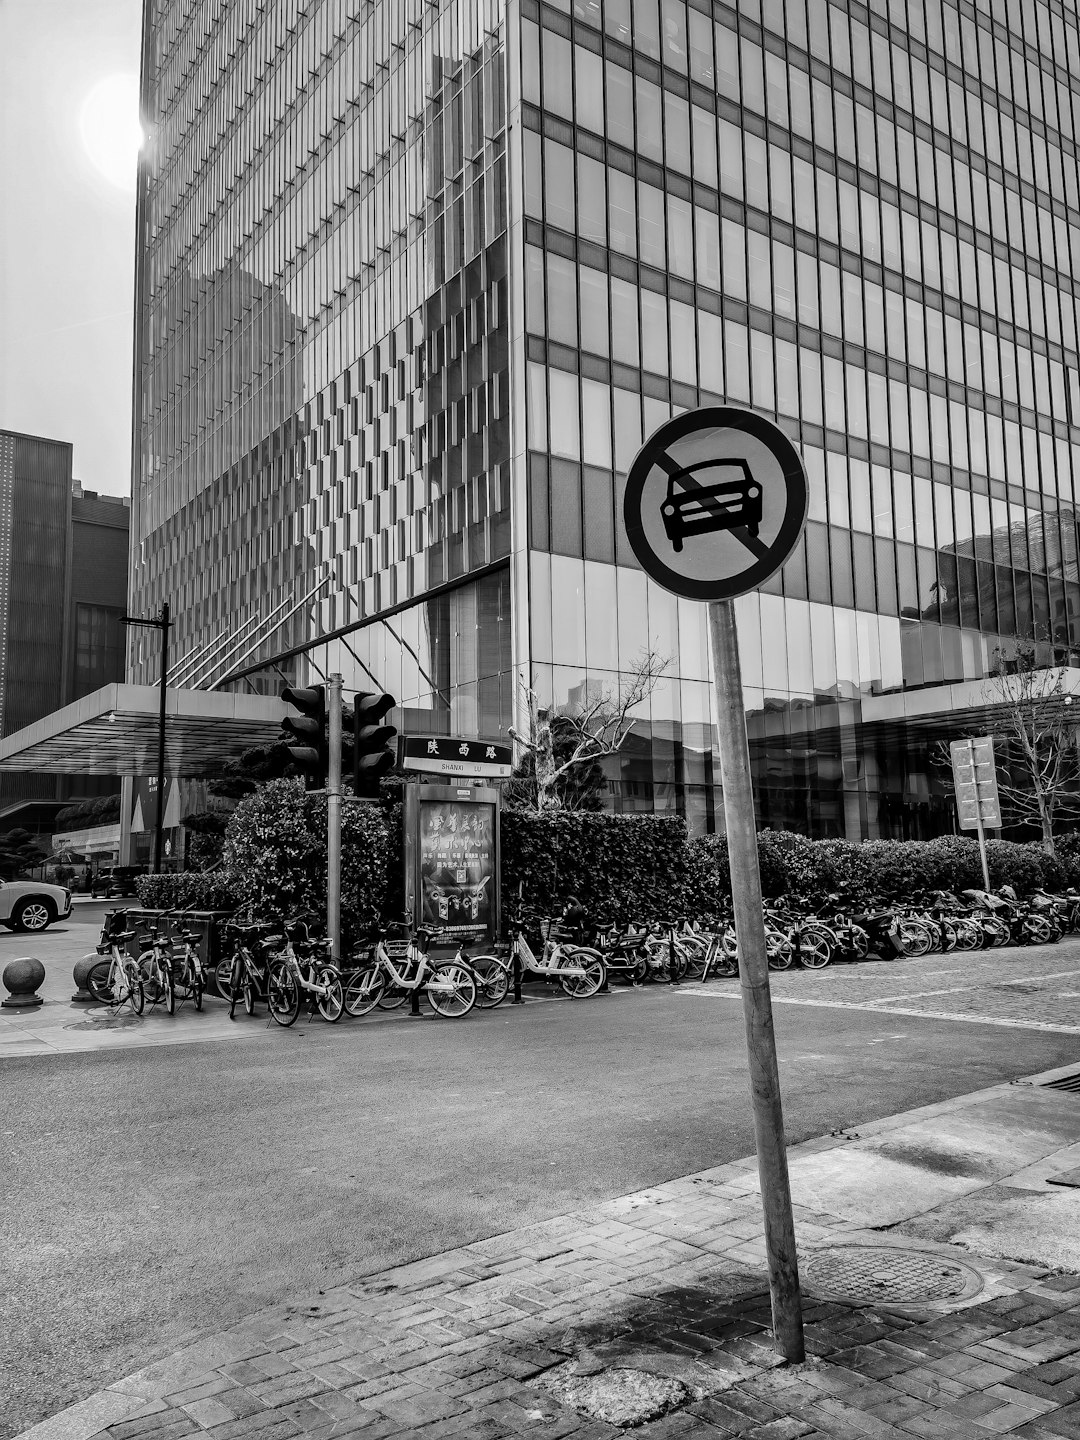 white and black street sign near gray concrete building during daytime